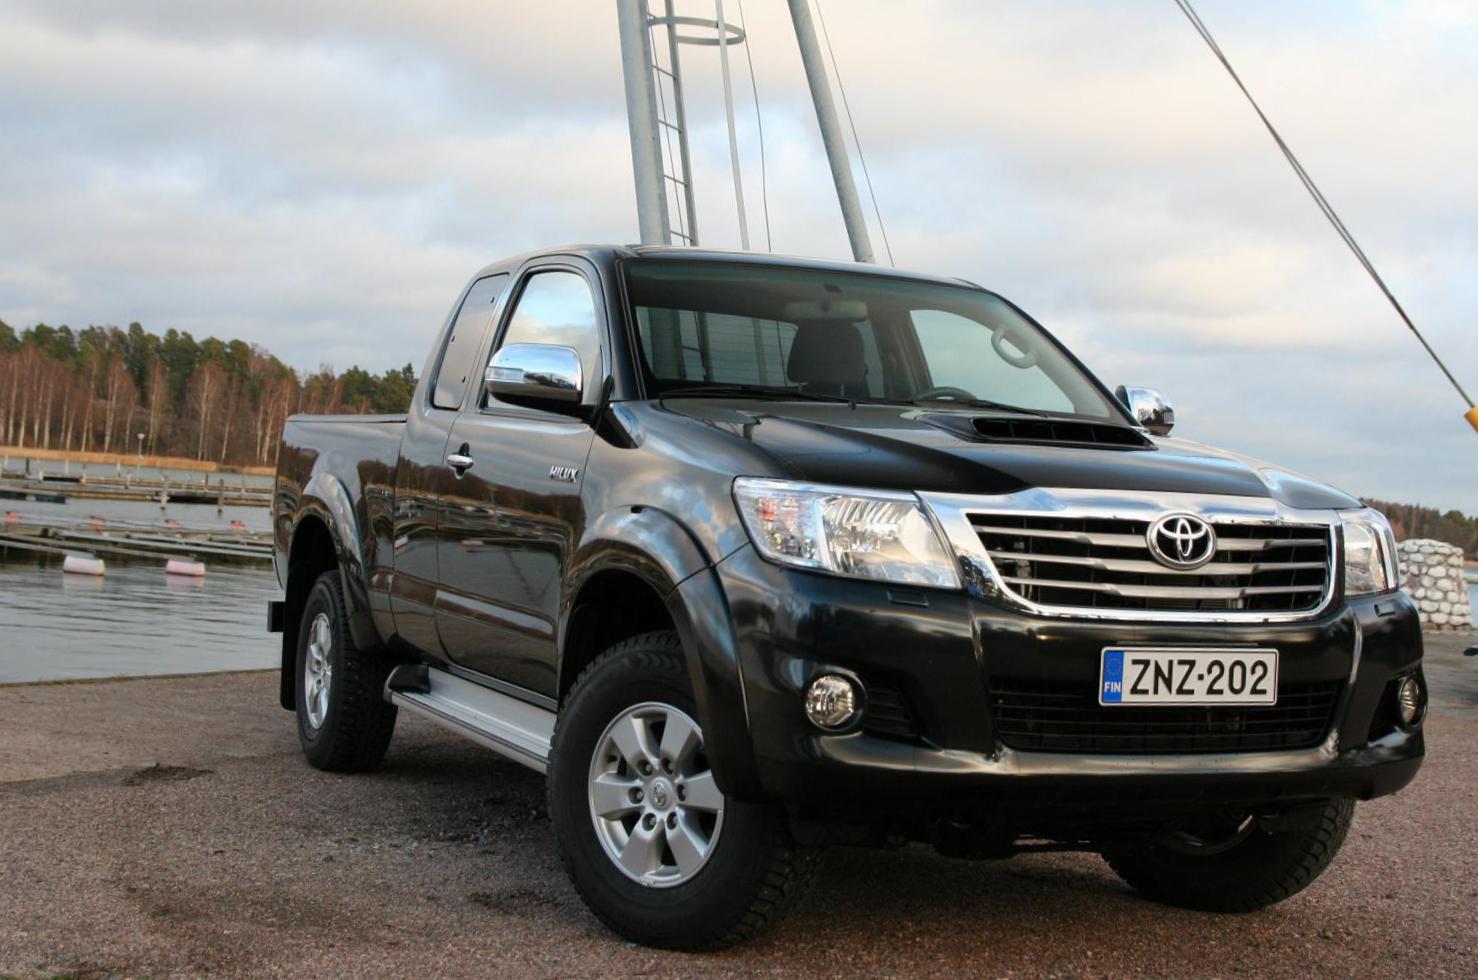 Hilux Extra Cab Toyota used 2007